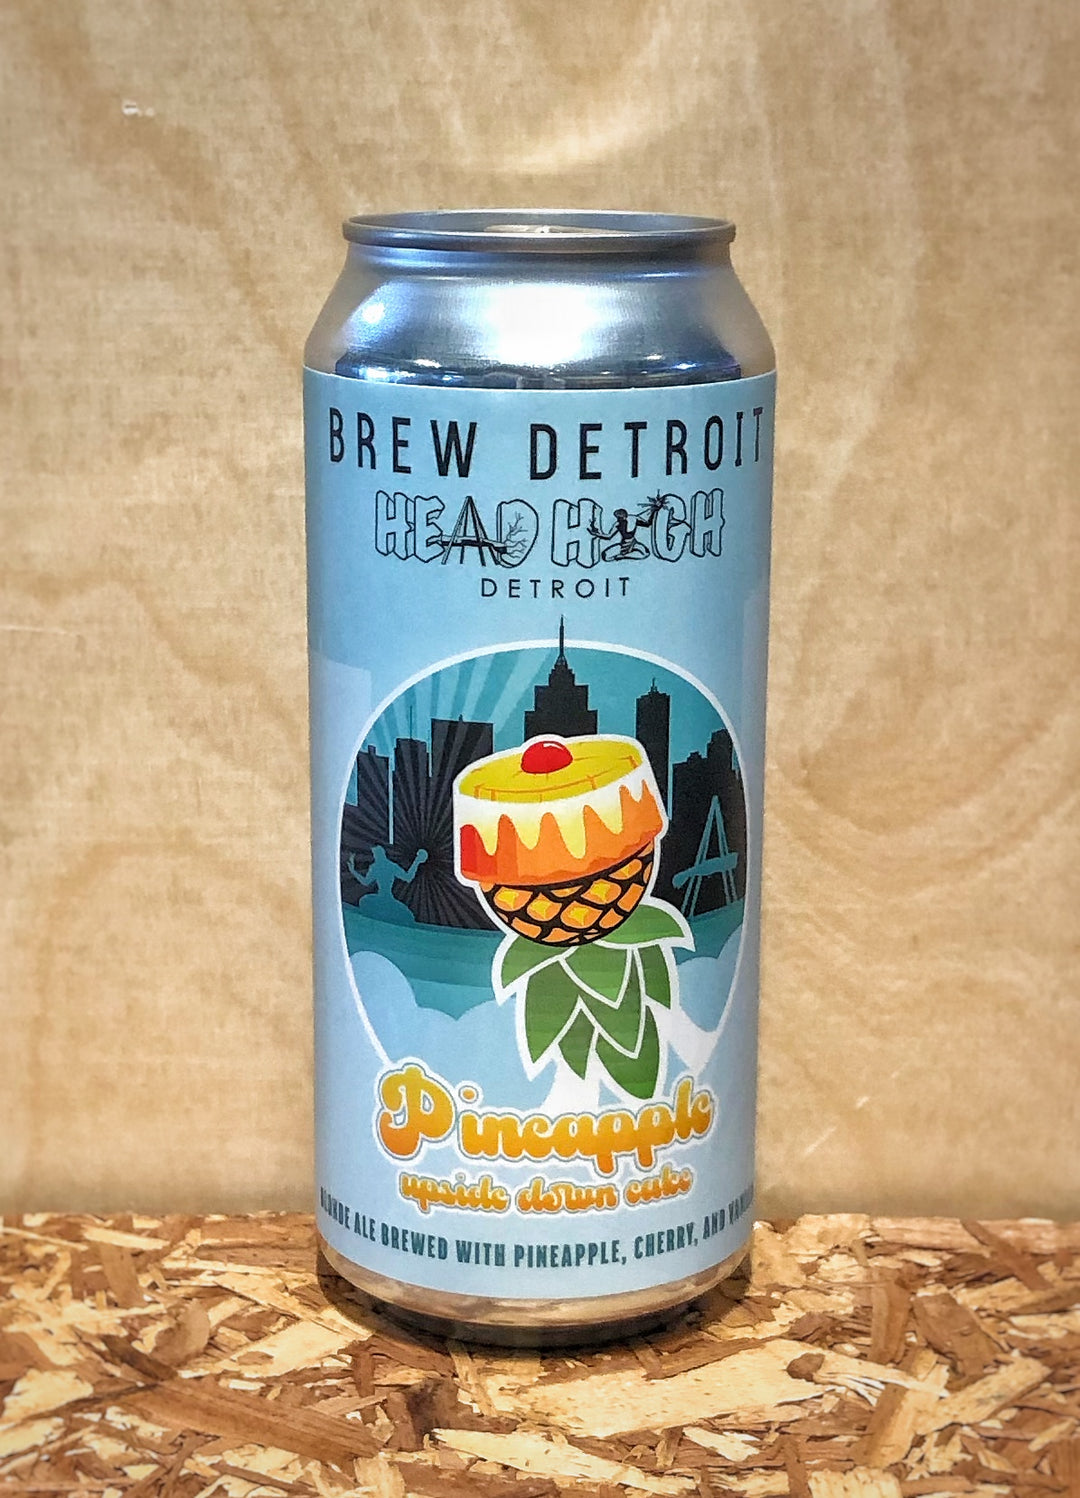 Brew Detroit x Head High Detroit 'Pineapple Upside Down Cake' Blonde Ale Brewed with Pineapple, Cherry, and Vanilla (Detroit, MI)